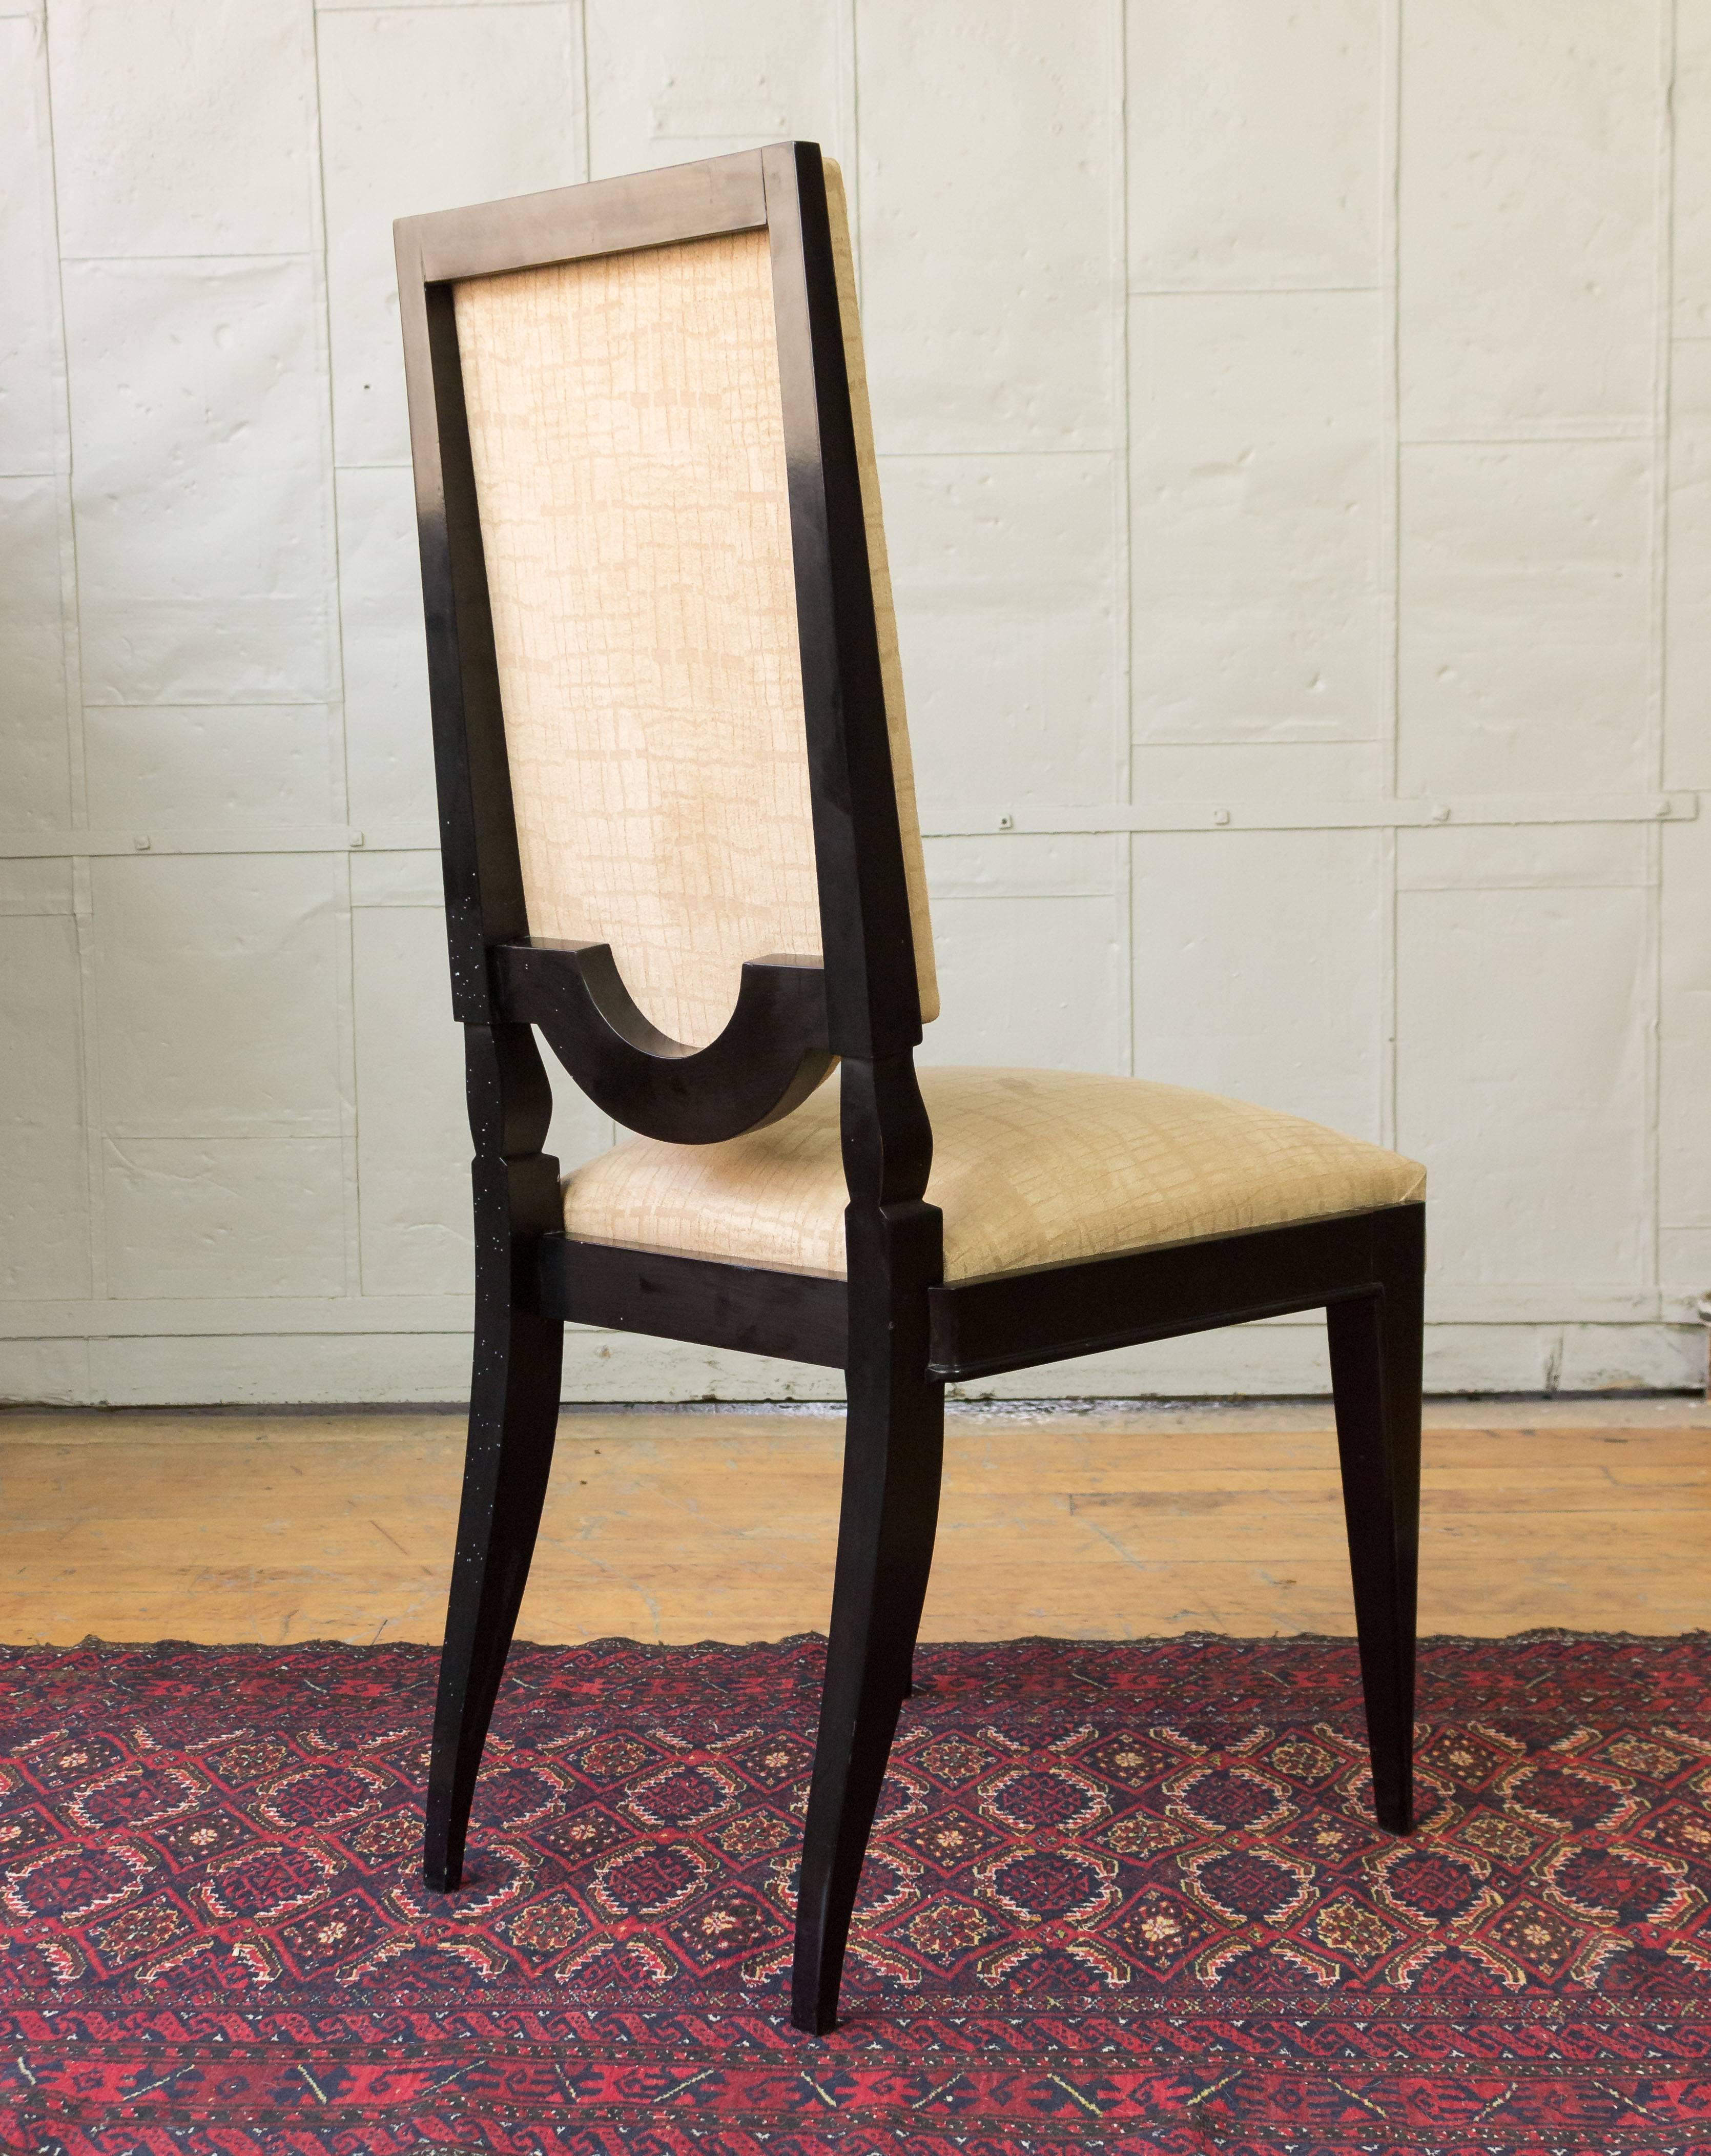 Mid-20th Century Pair of High Back Dining Chairs